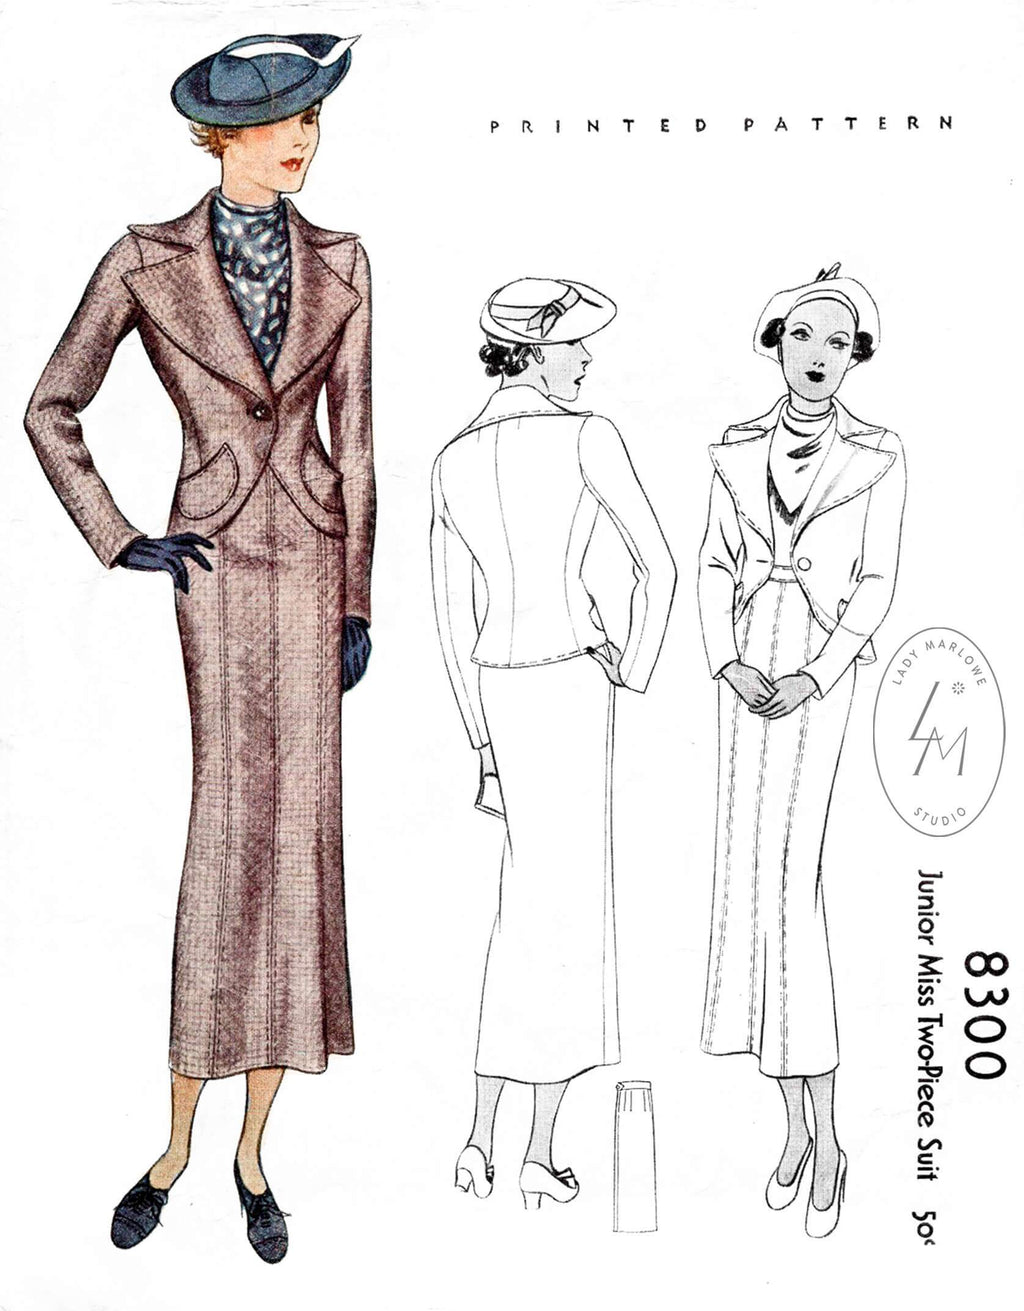 McCall 8300 1930s 1935 suit jacket & pencil skirt curved seams vintage sewing pattern reproduction